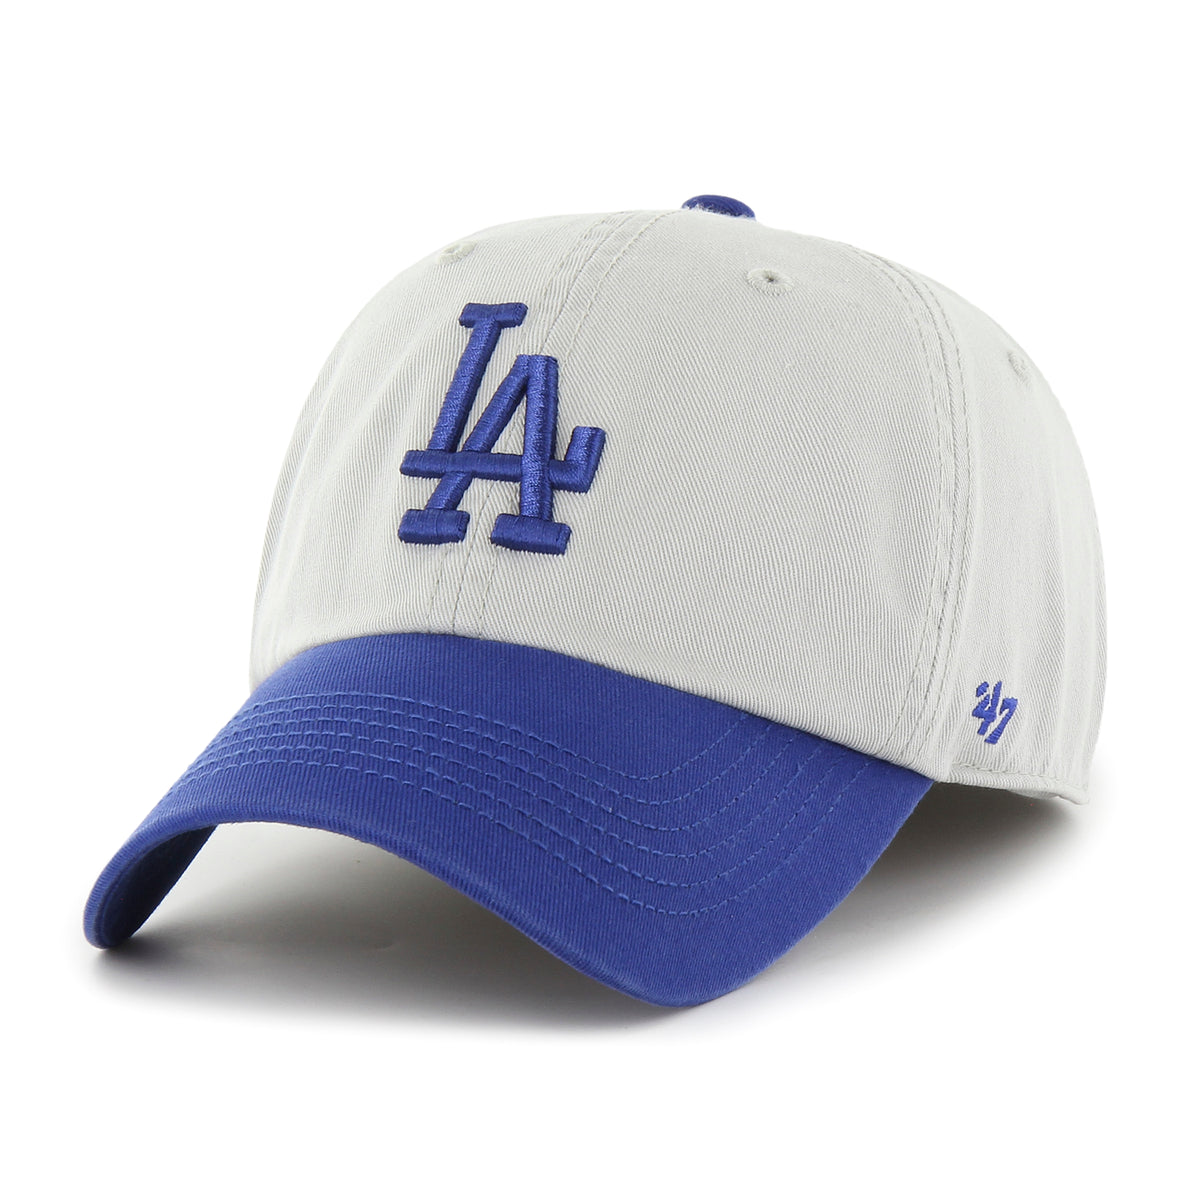 LOS ANGELES DODGERS COOPERSTOWN WORLD SERIES SURE SHOT CLASSIC TWO TONE '47 FRANCHISE